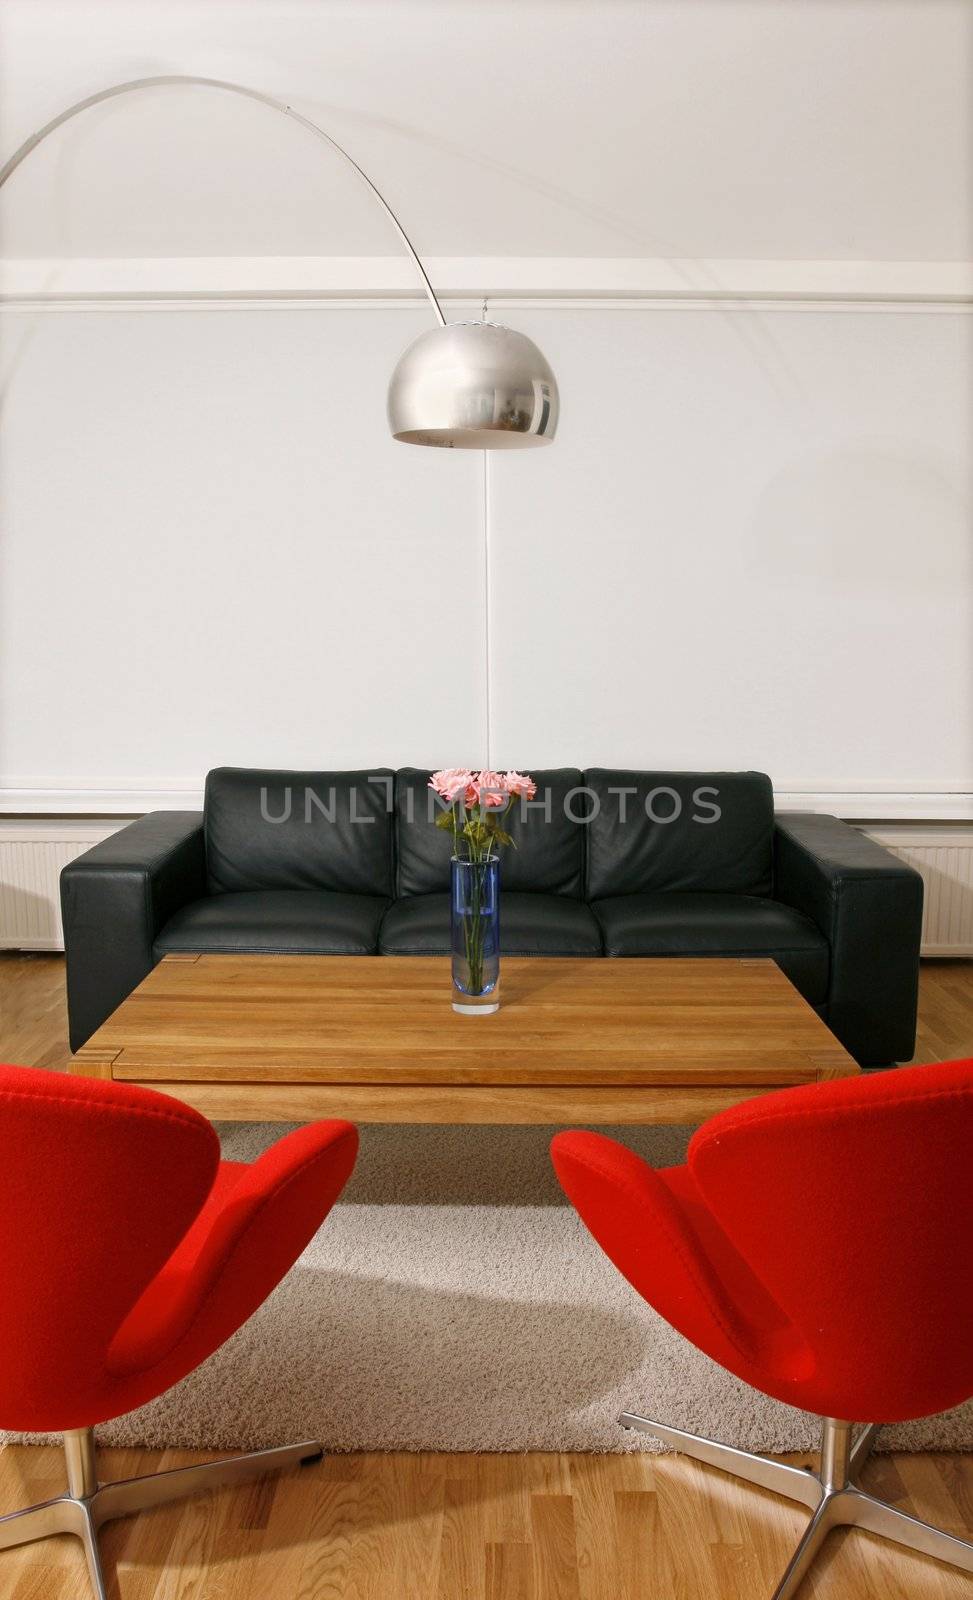 New and trendy living room with modern furniture